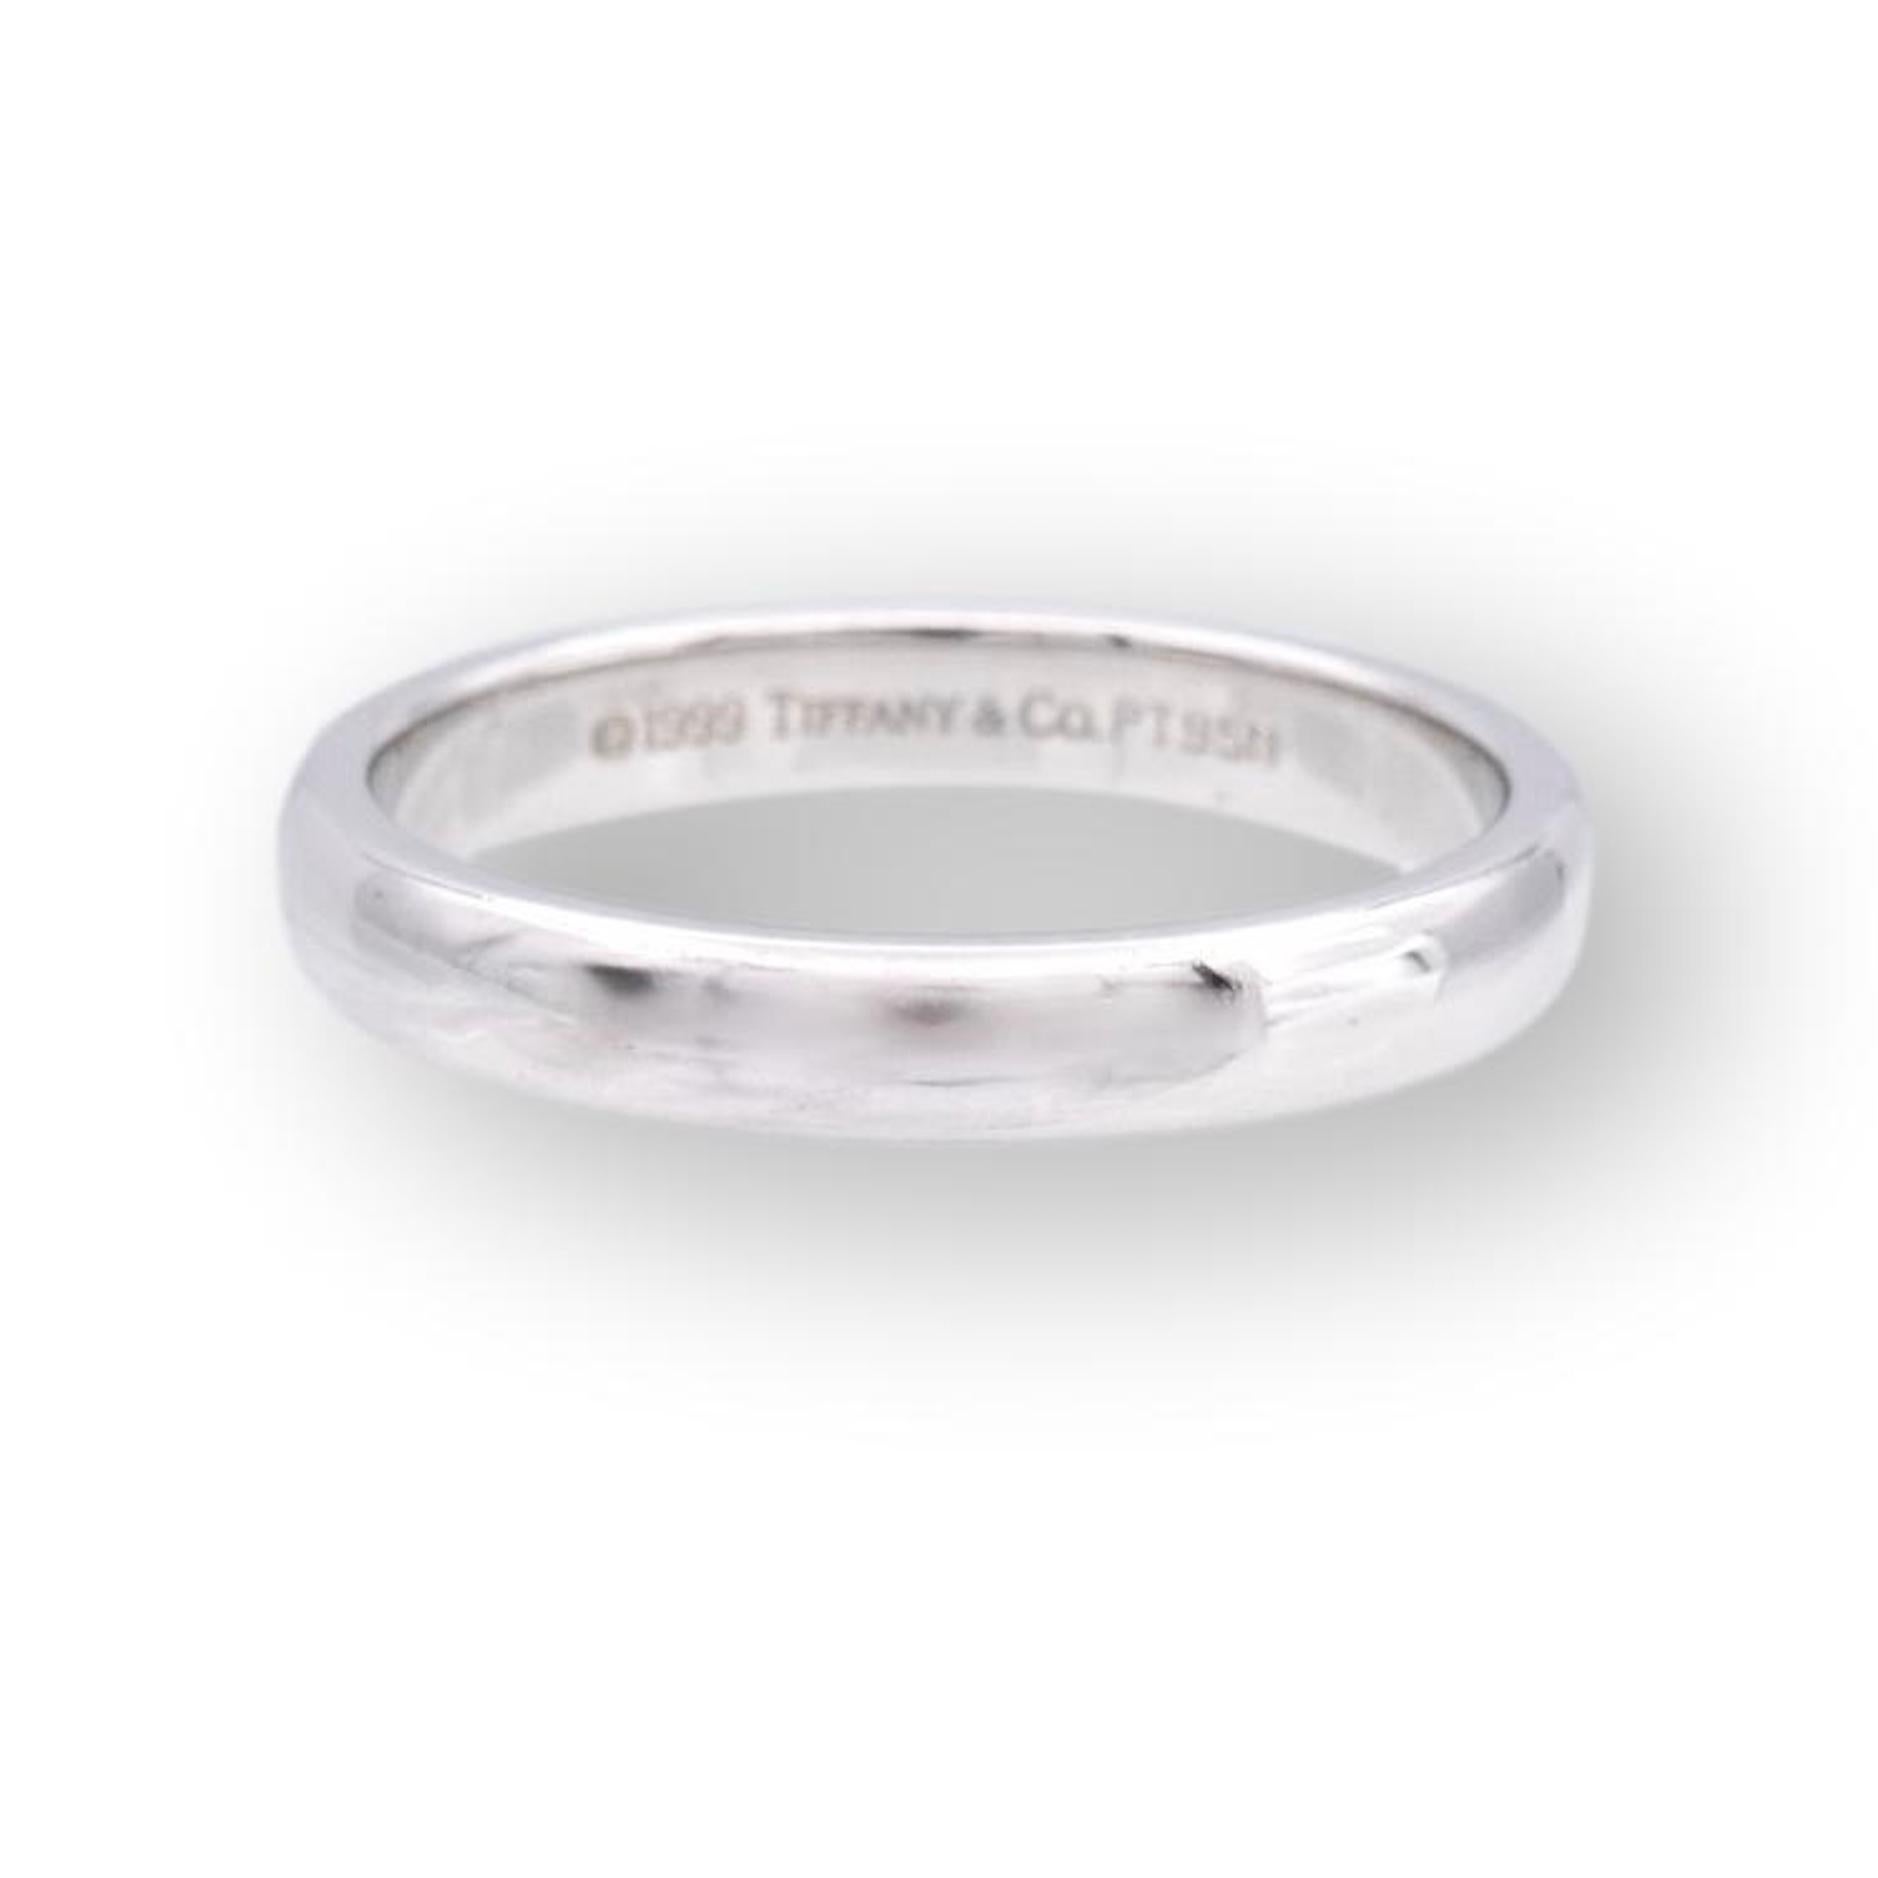 Vintage Tiffany & Co. 3mm Classic wedding band ring finely crafted in platinum. Made in 1999. Fully hallmarked with logo and metal content.

Ring Specifications
Brand: Tiffany & Co.
Style: Classic (comfort-fit)
Hallmarks: © 1999 Tiffany & Co.